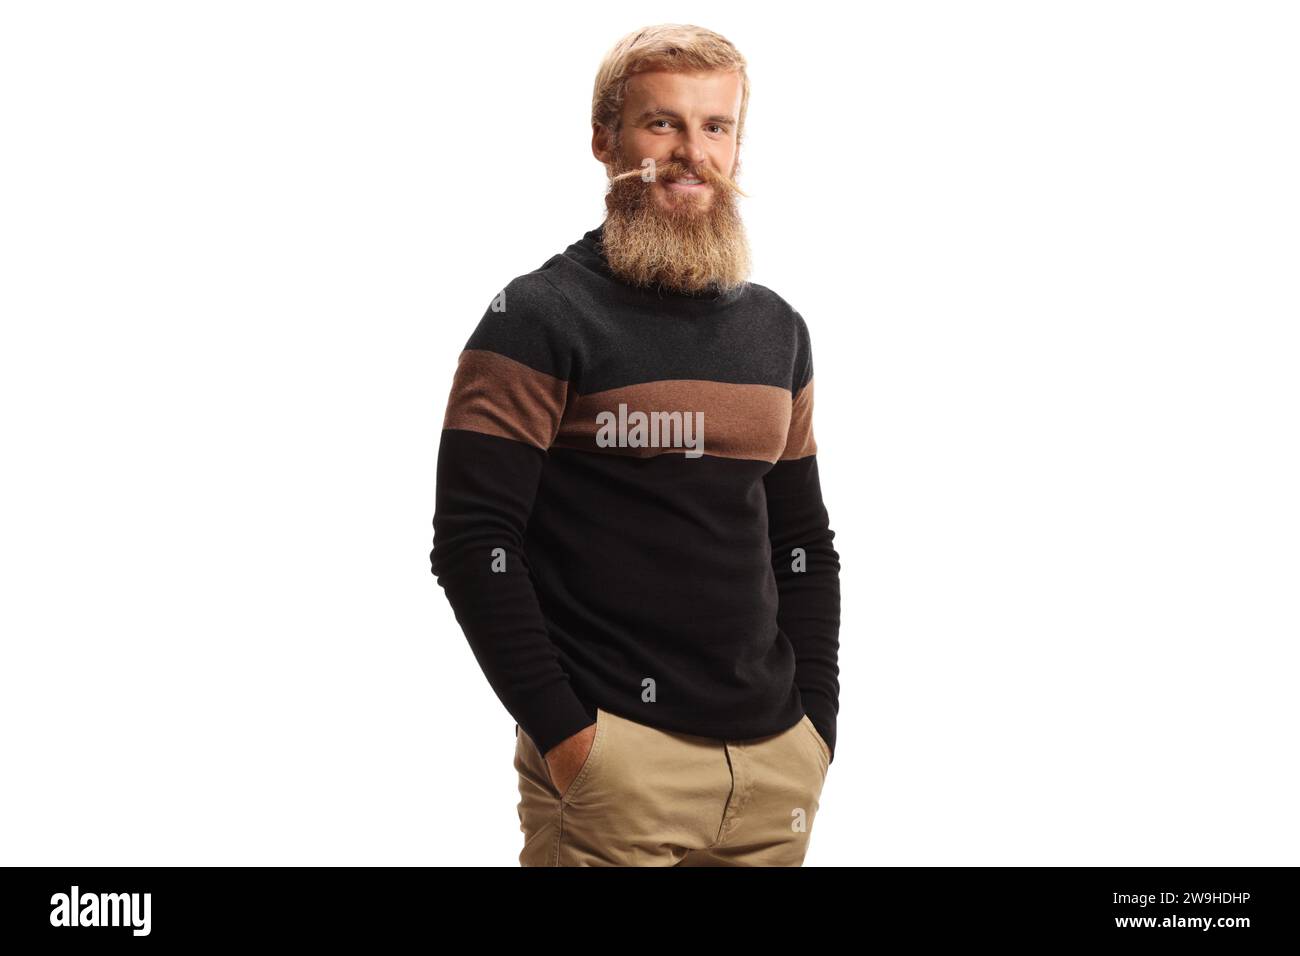 Man with blond beard and mustaches wearing a black turtle neck jumper isolated on white background Stock Photo